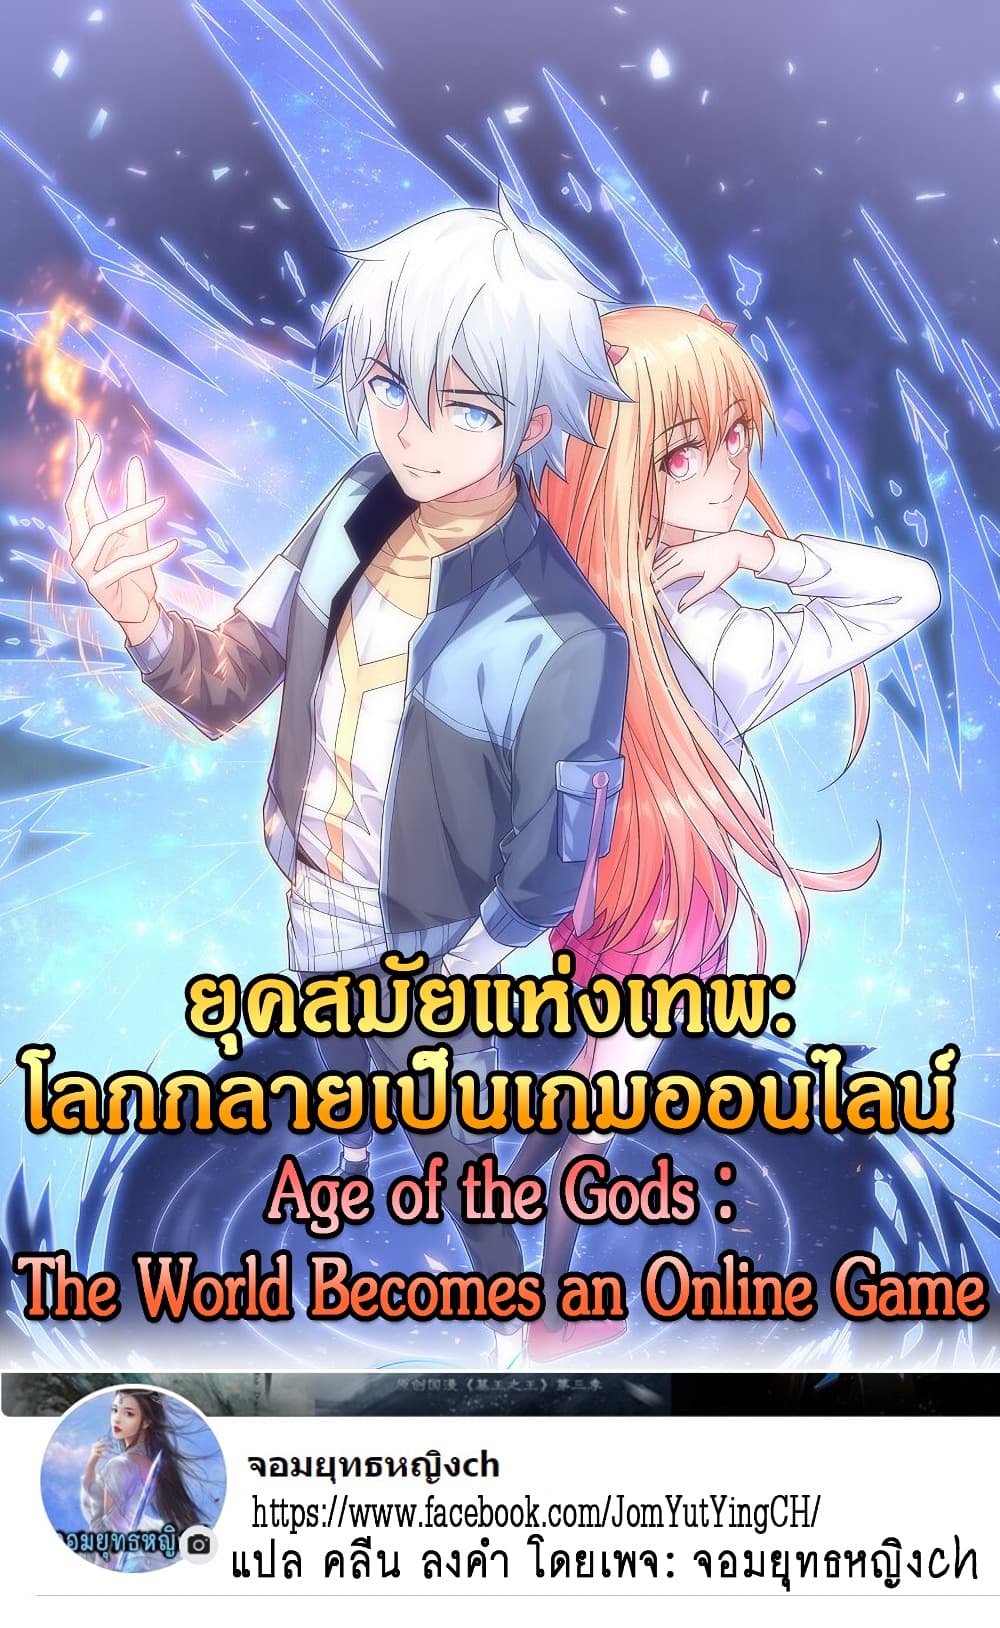 Age of the Gods: The World Becomes an Online Game 6-6